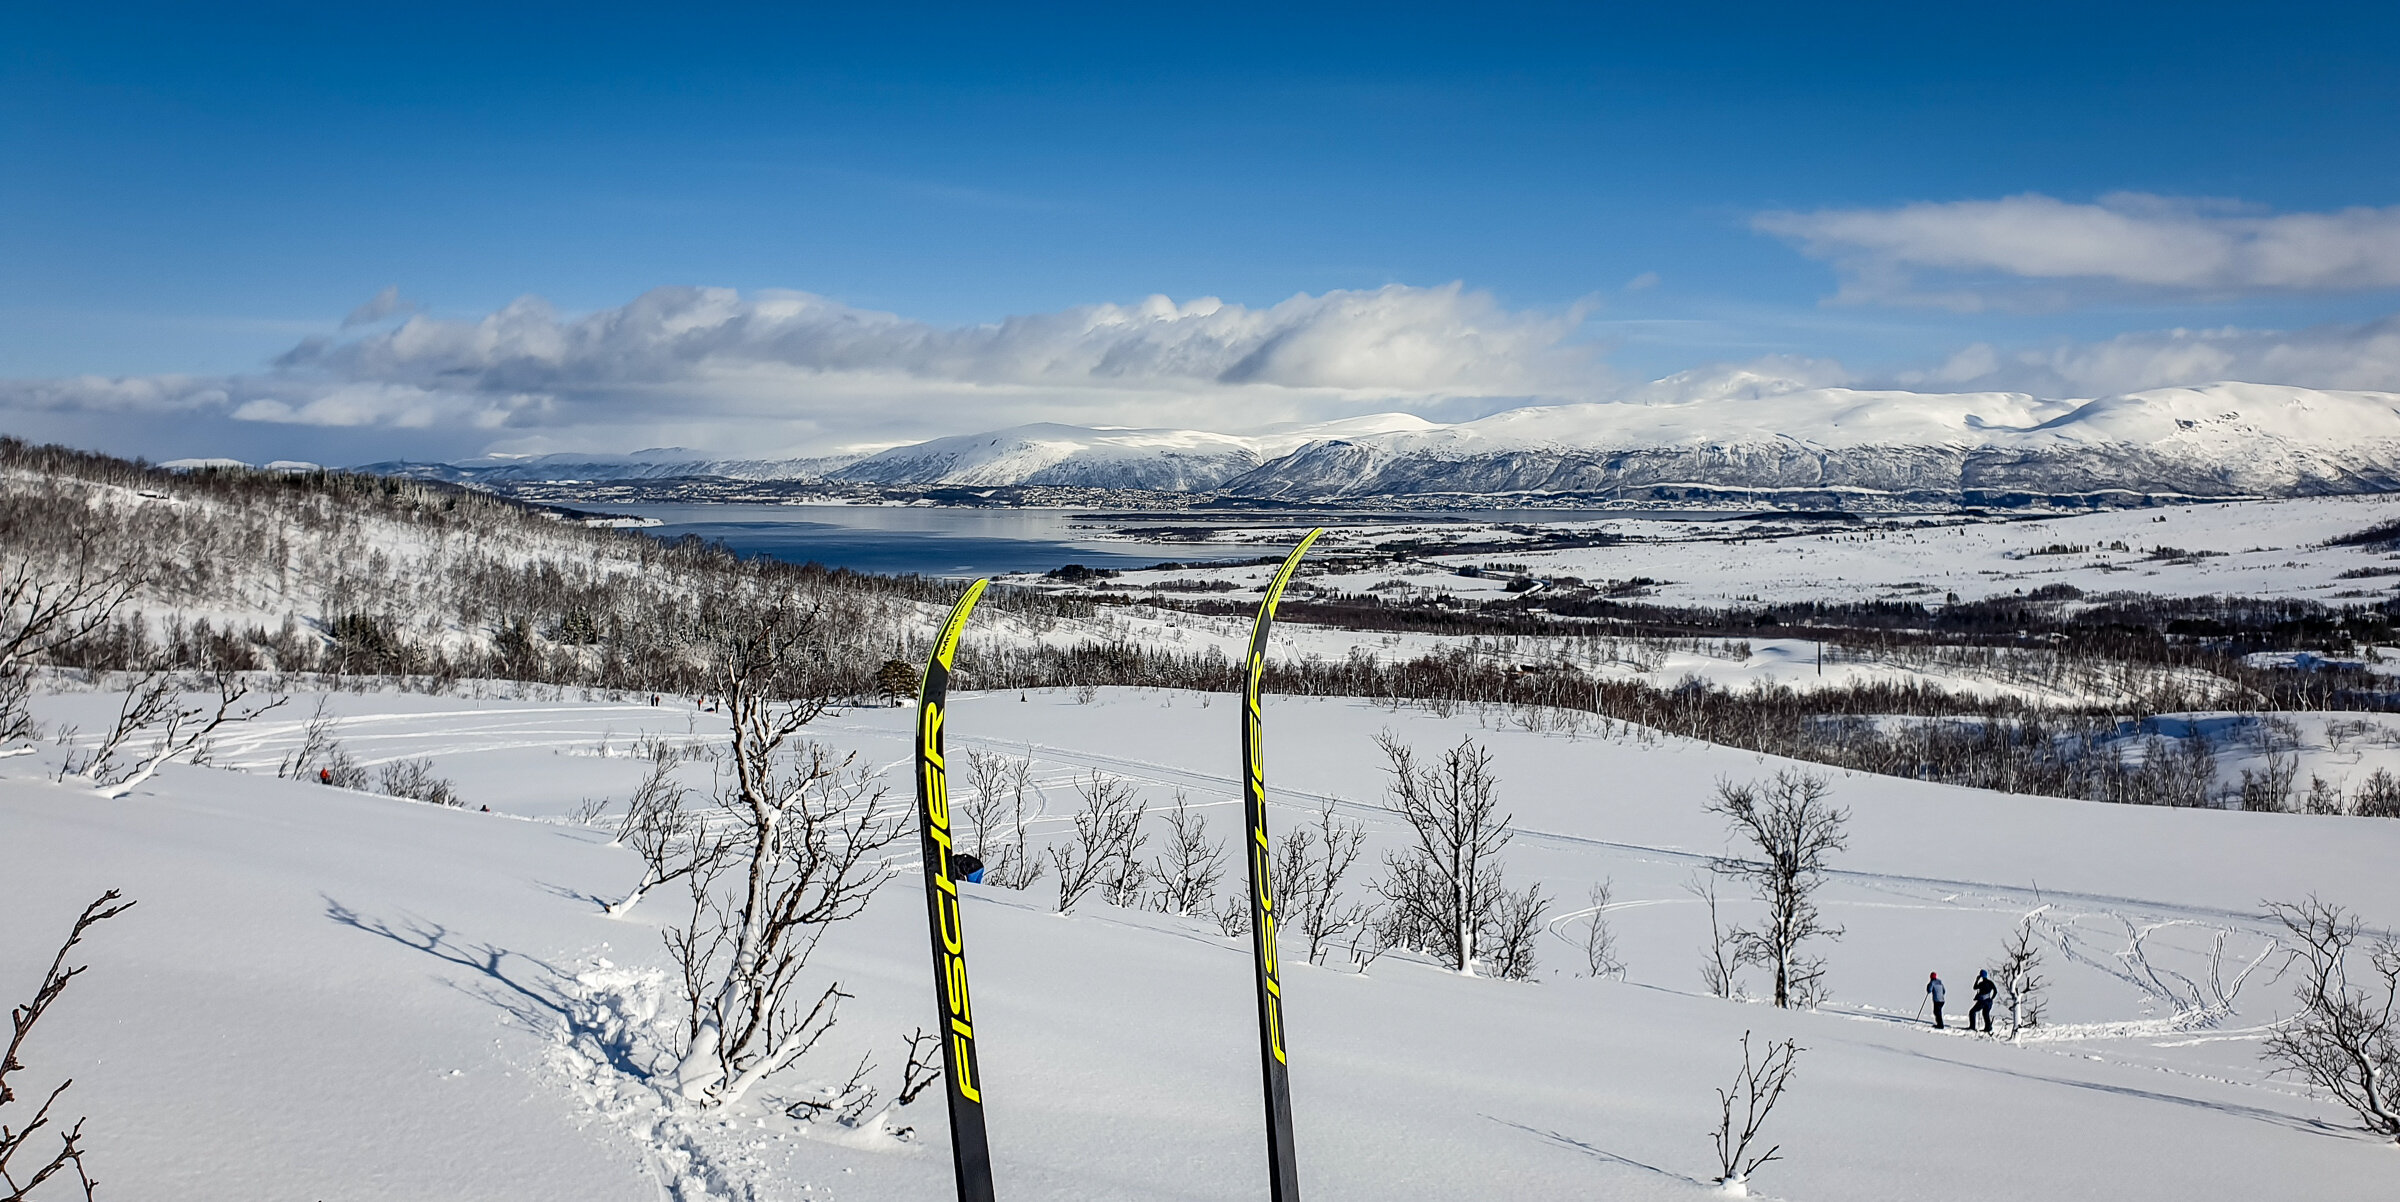 On the trails surrounding the arctic city of Tromsø, Norway.  JONAA©Helge M. Markusson